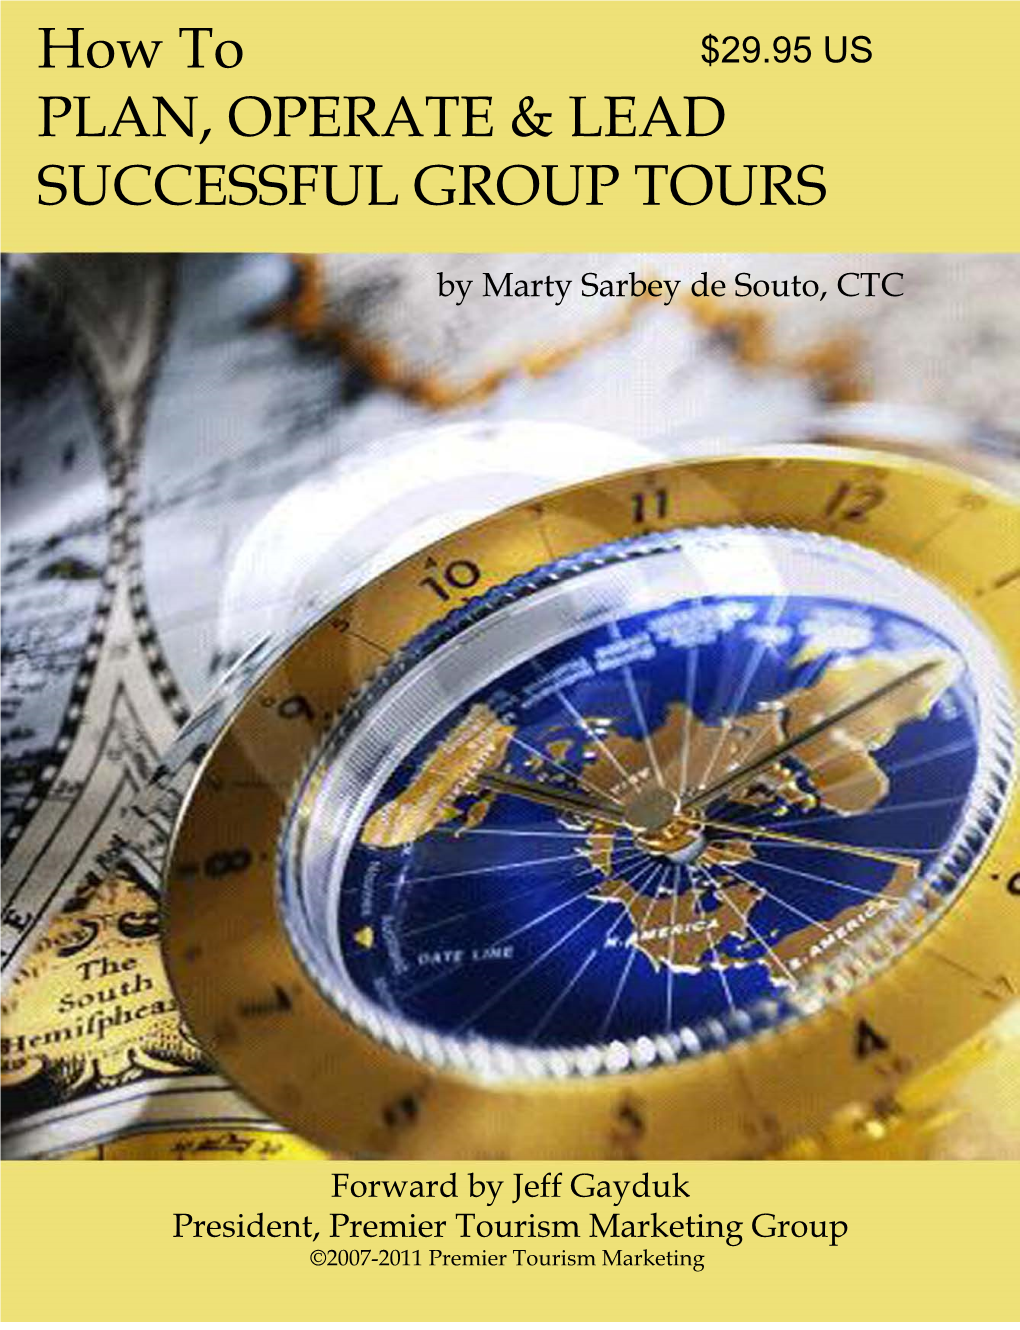 How to PLAN, OPERATE & LEAD SUCCESSFUL GROUP TOURS